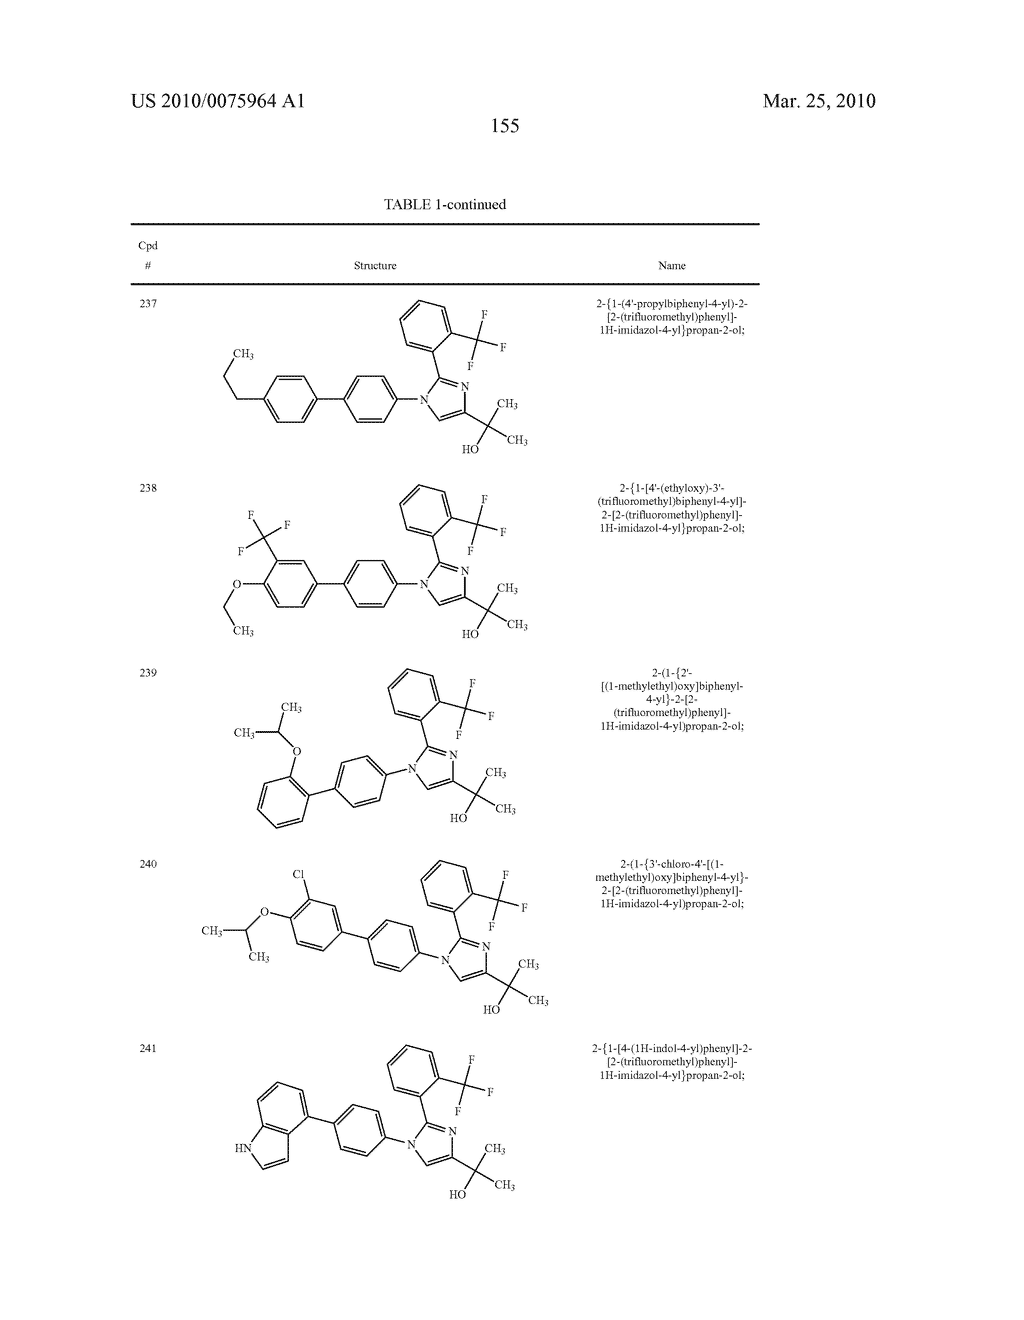 IMIDAZOLE BASED LXR MODULATORS - diagram, schematic, and image 156